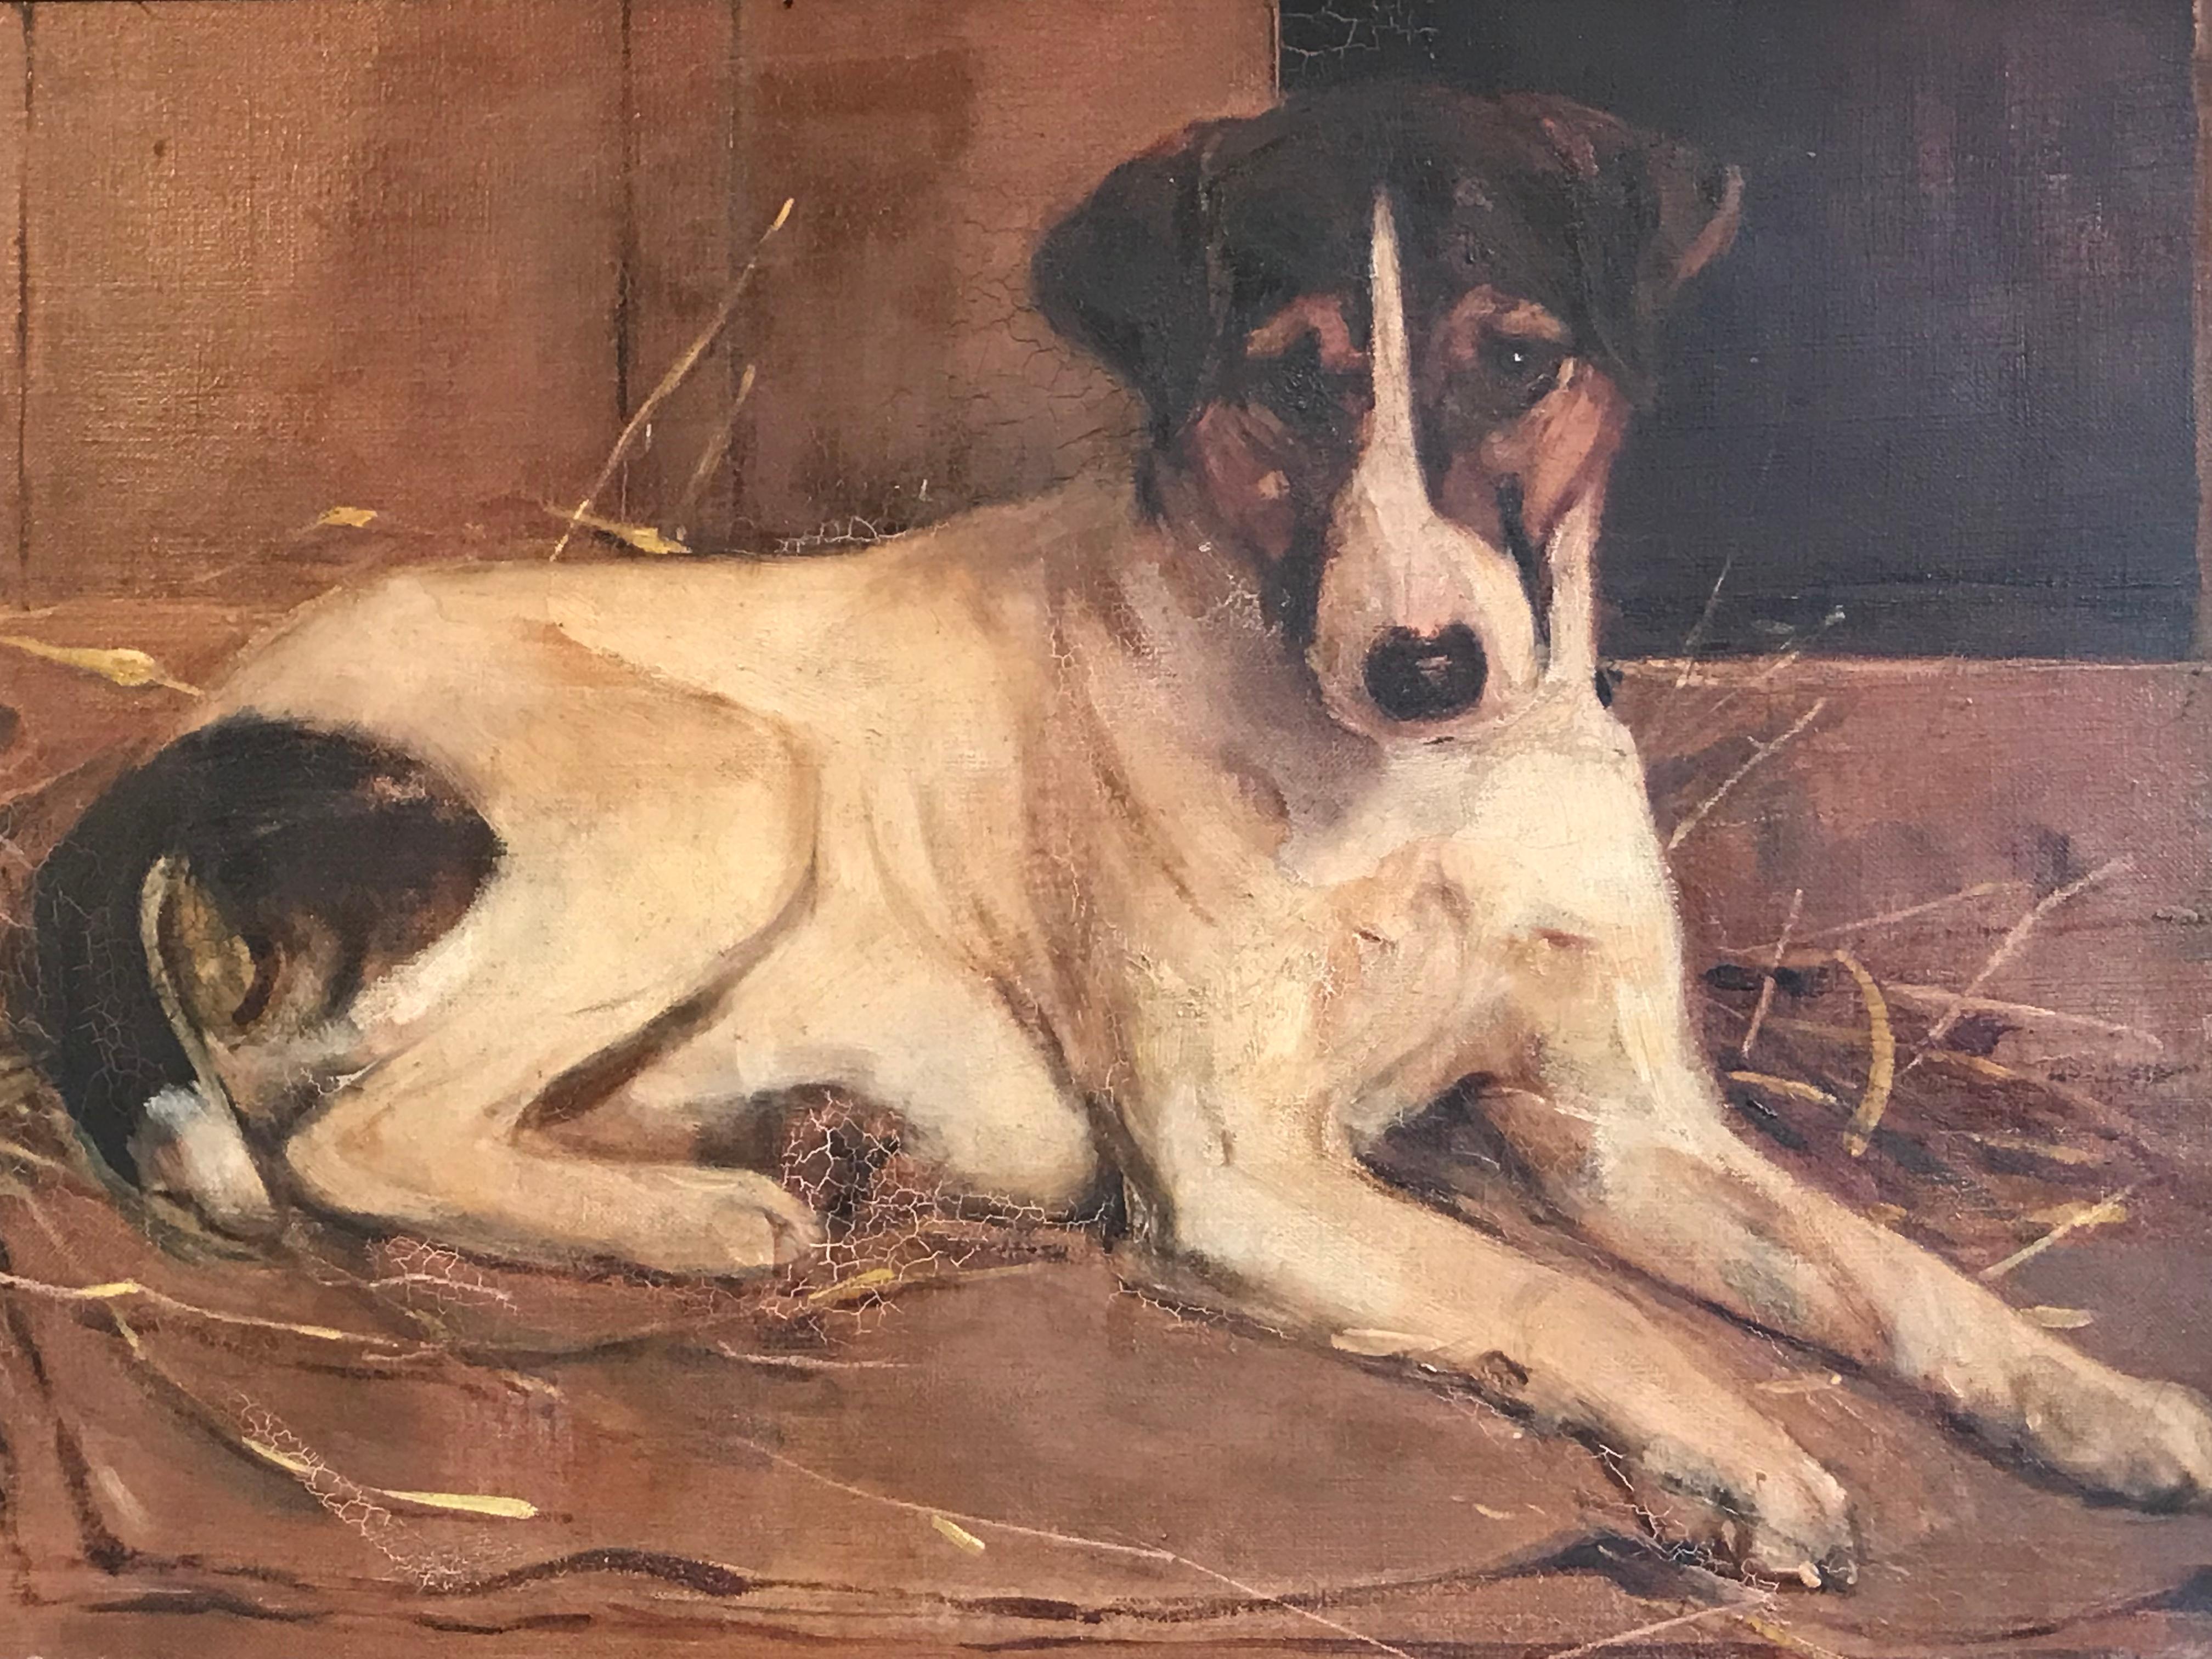 Samuel Fulton Animal Painting - Jack Russell Terrier Dog British Oil Painting on Canvas, Antique signed original